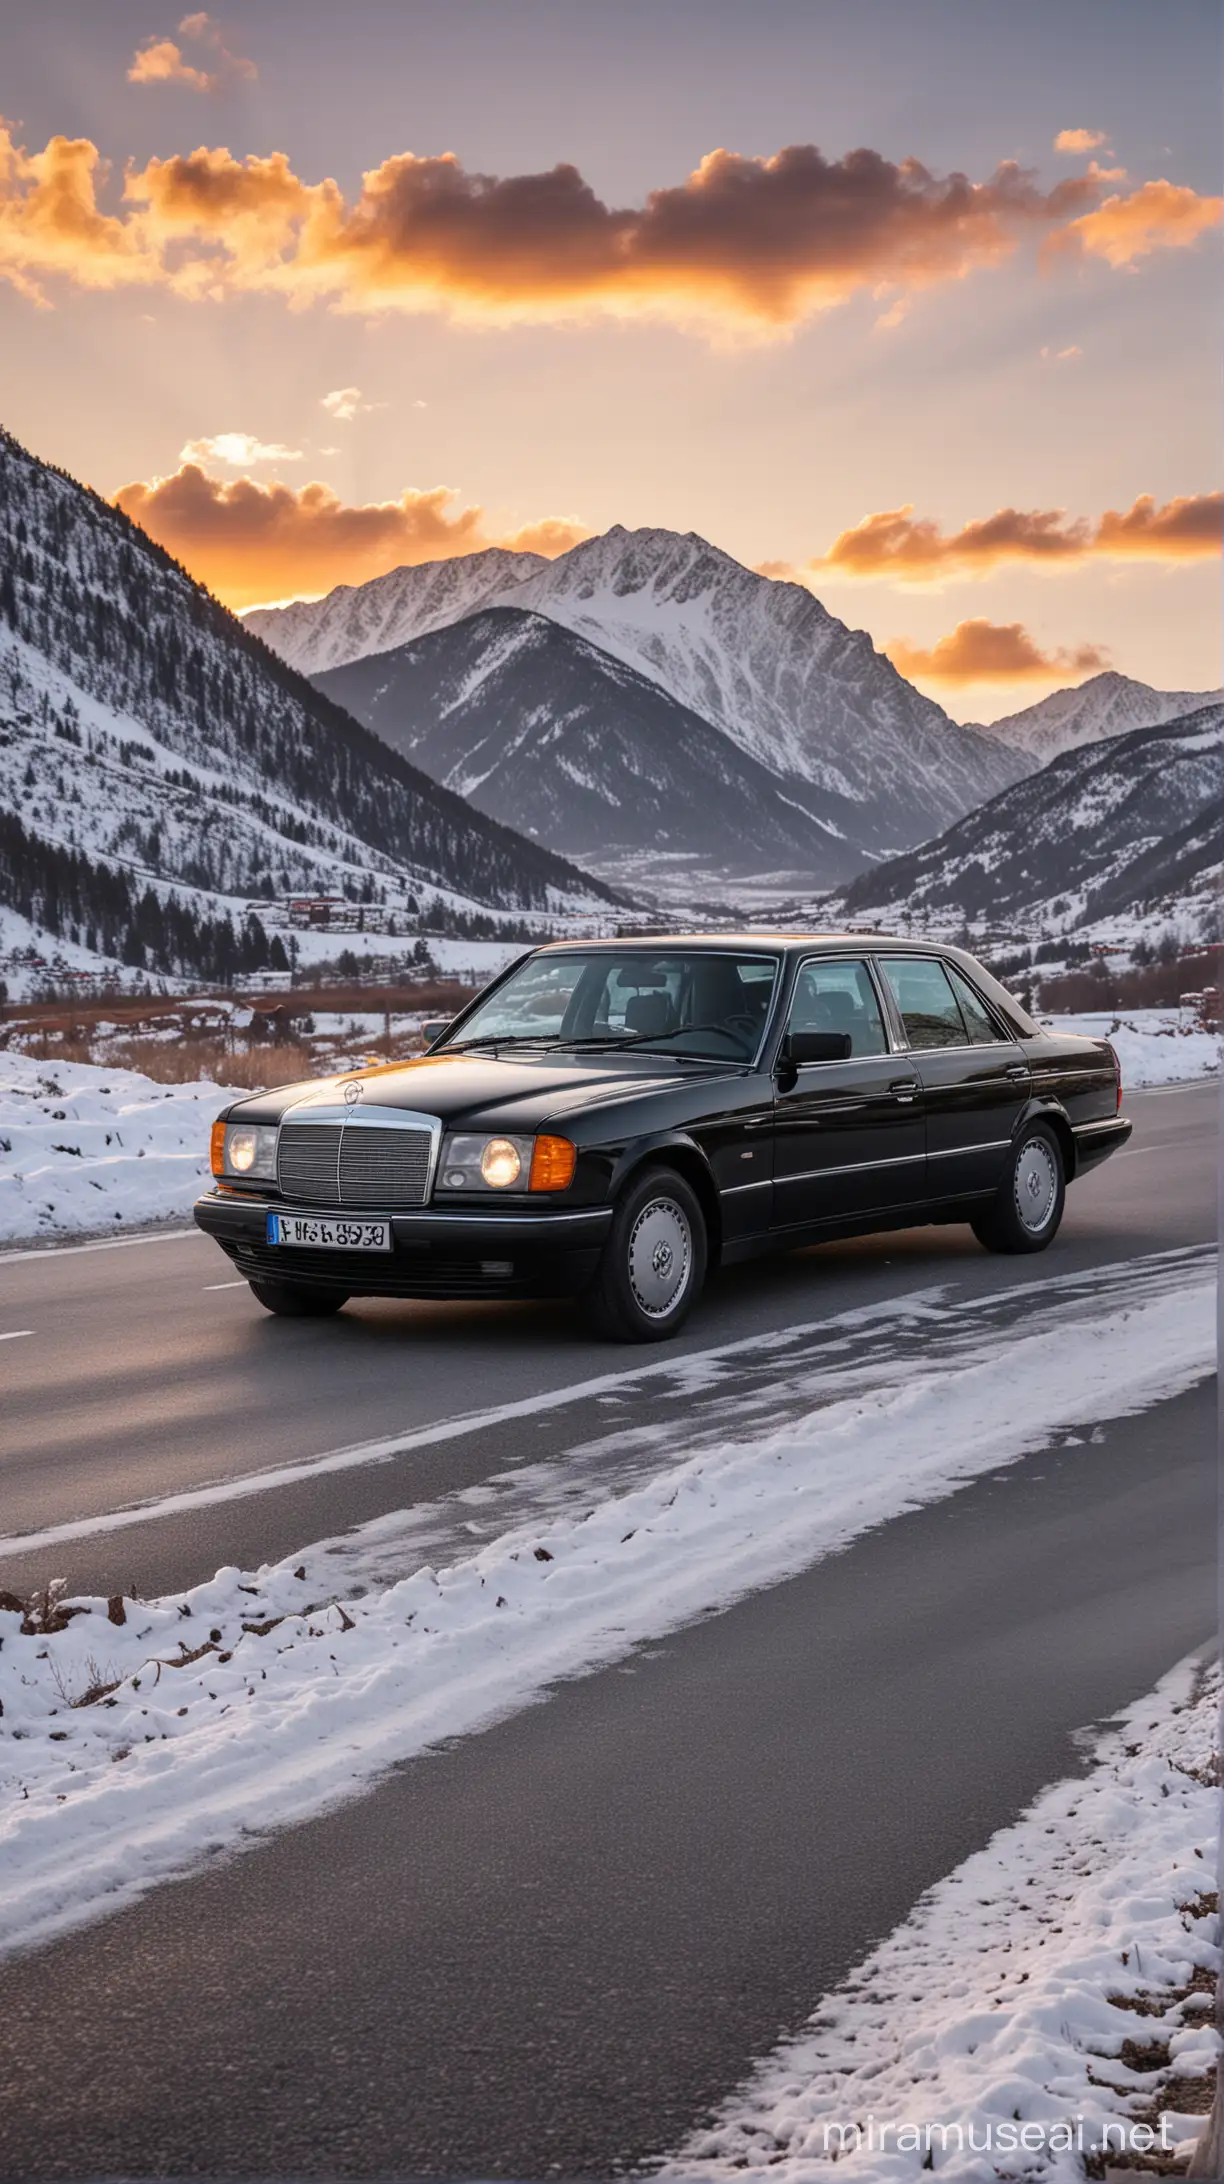 Professional automotive photography. A black-shiny1986 Mercedes Benz W124 stopped on an empty road. Mountains with snow on the summit. Sunset.